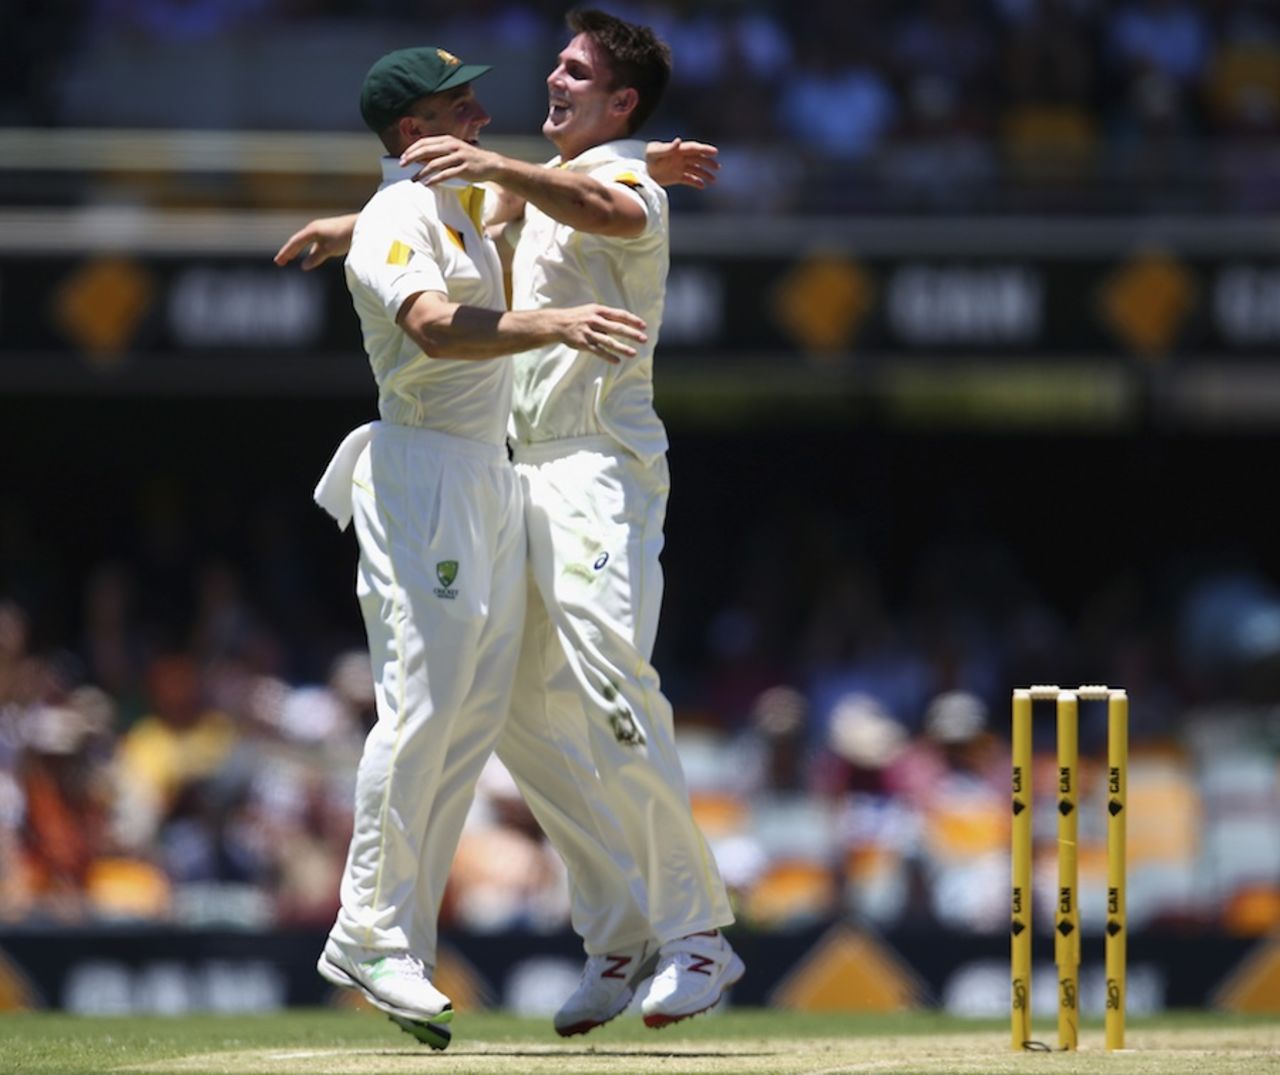 The brothers Marsh celebrate Mitchell's first Test wicket, Australia v India, 2nd Test, Brisbane, 1st day, December 17, 2014